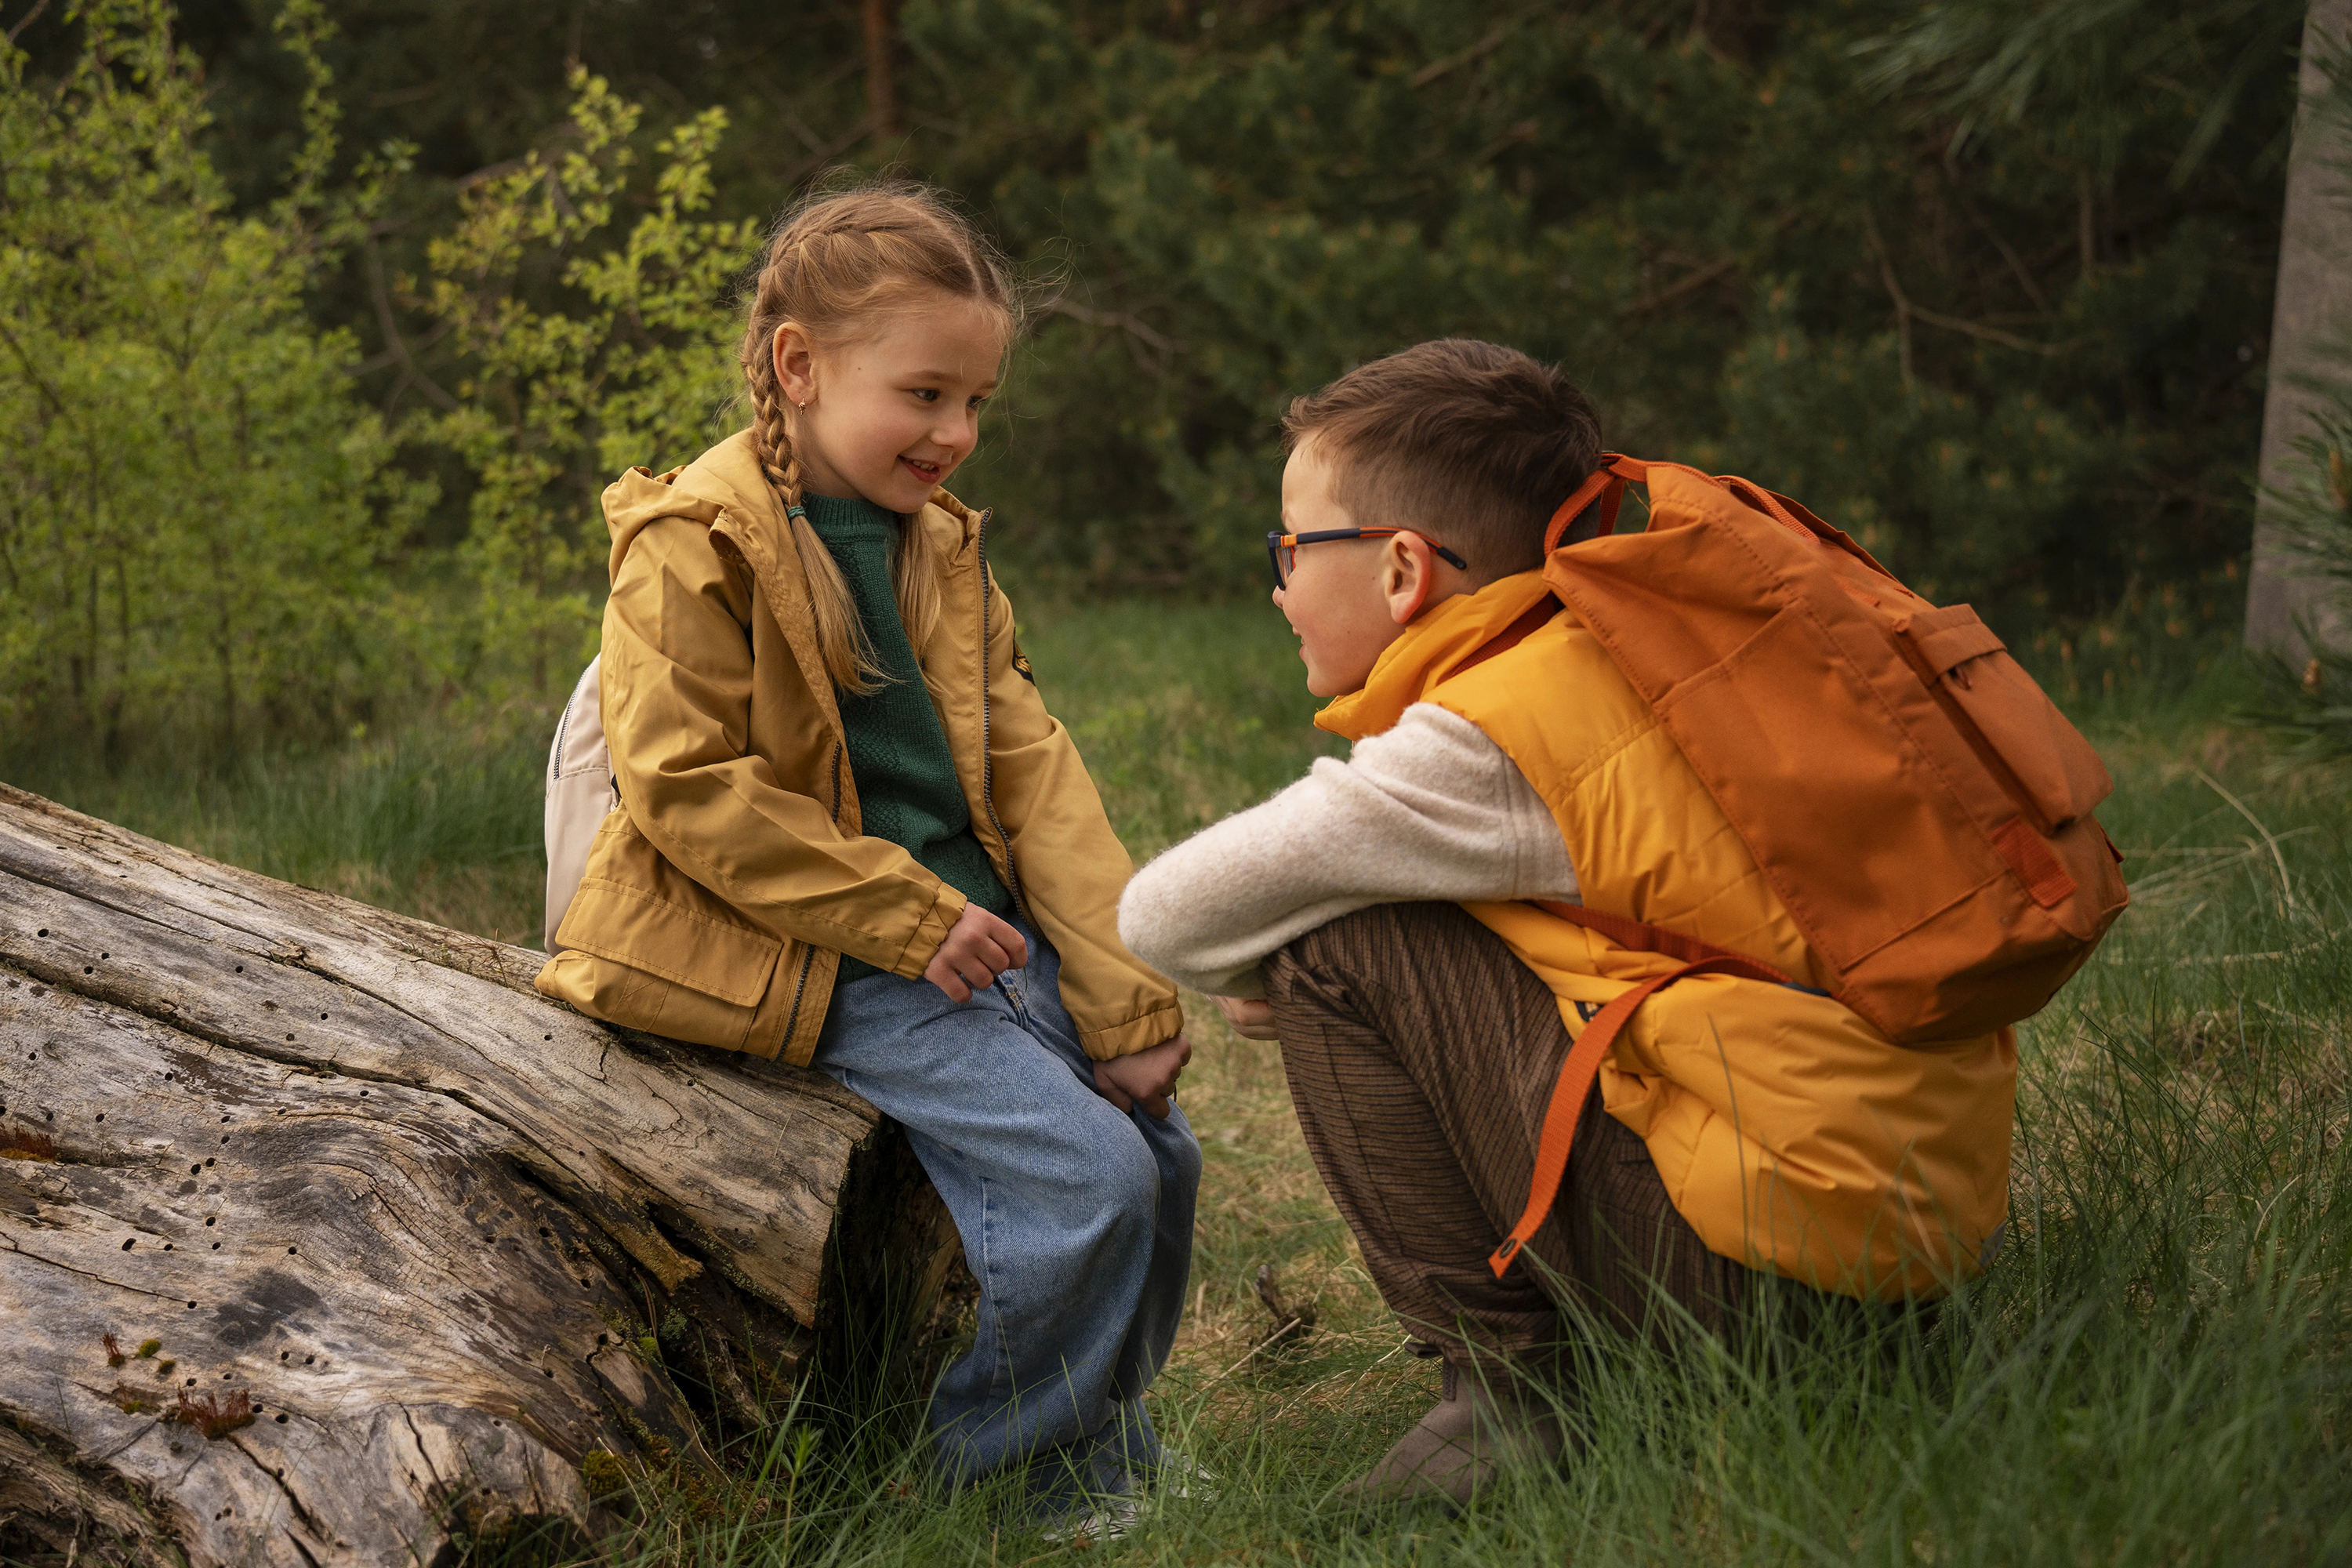 view little kids with backpacks spending time nature outdoors.jpg